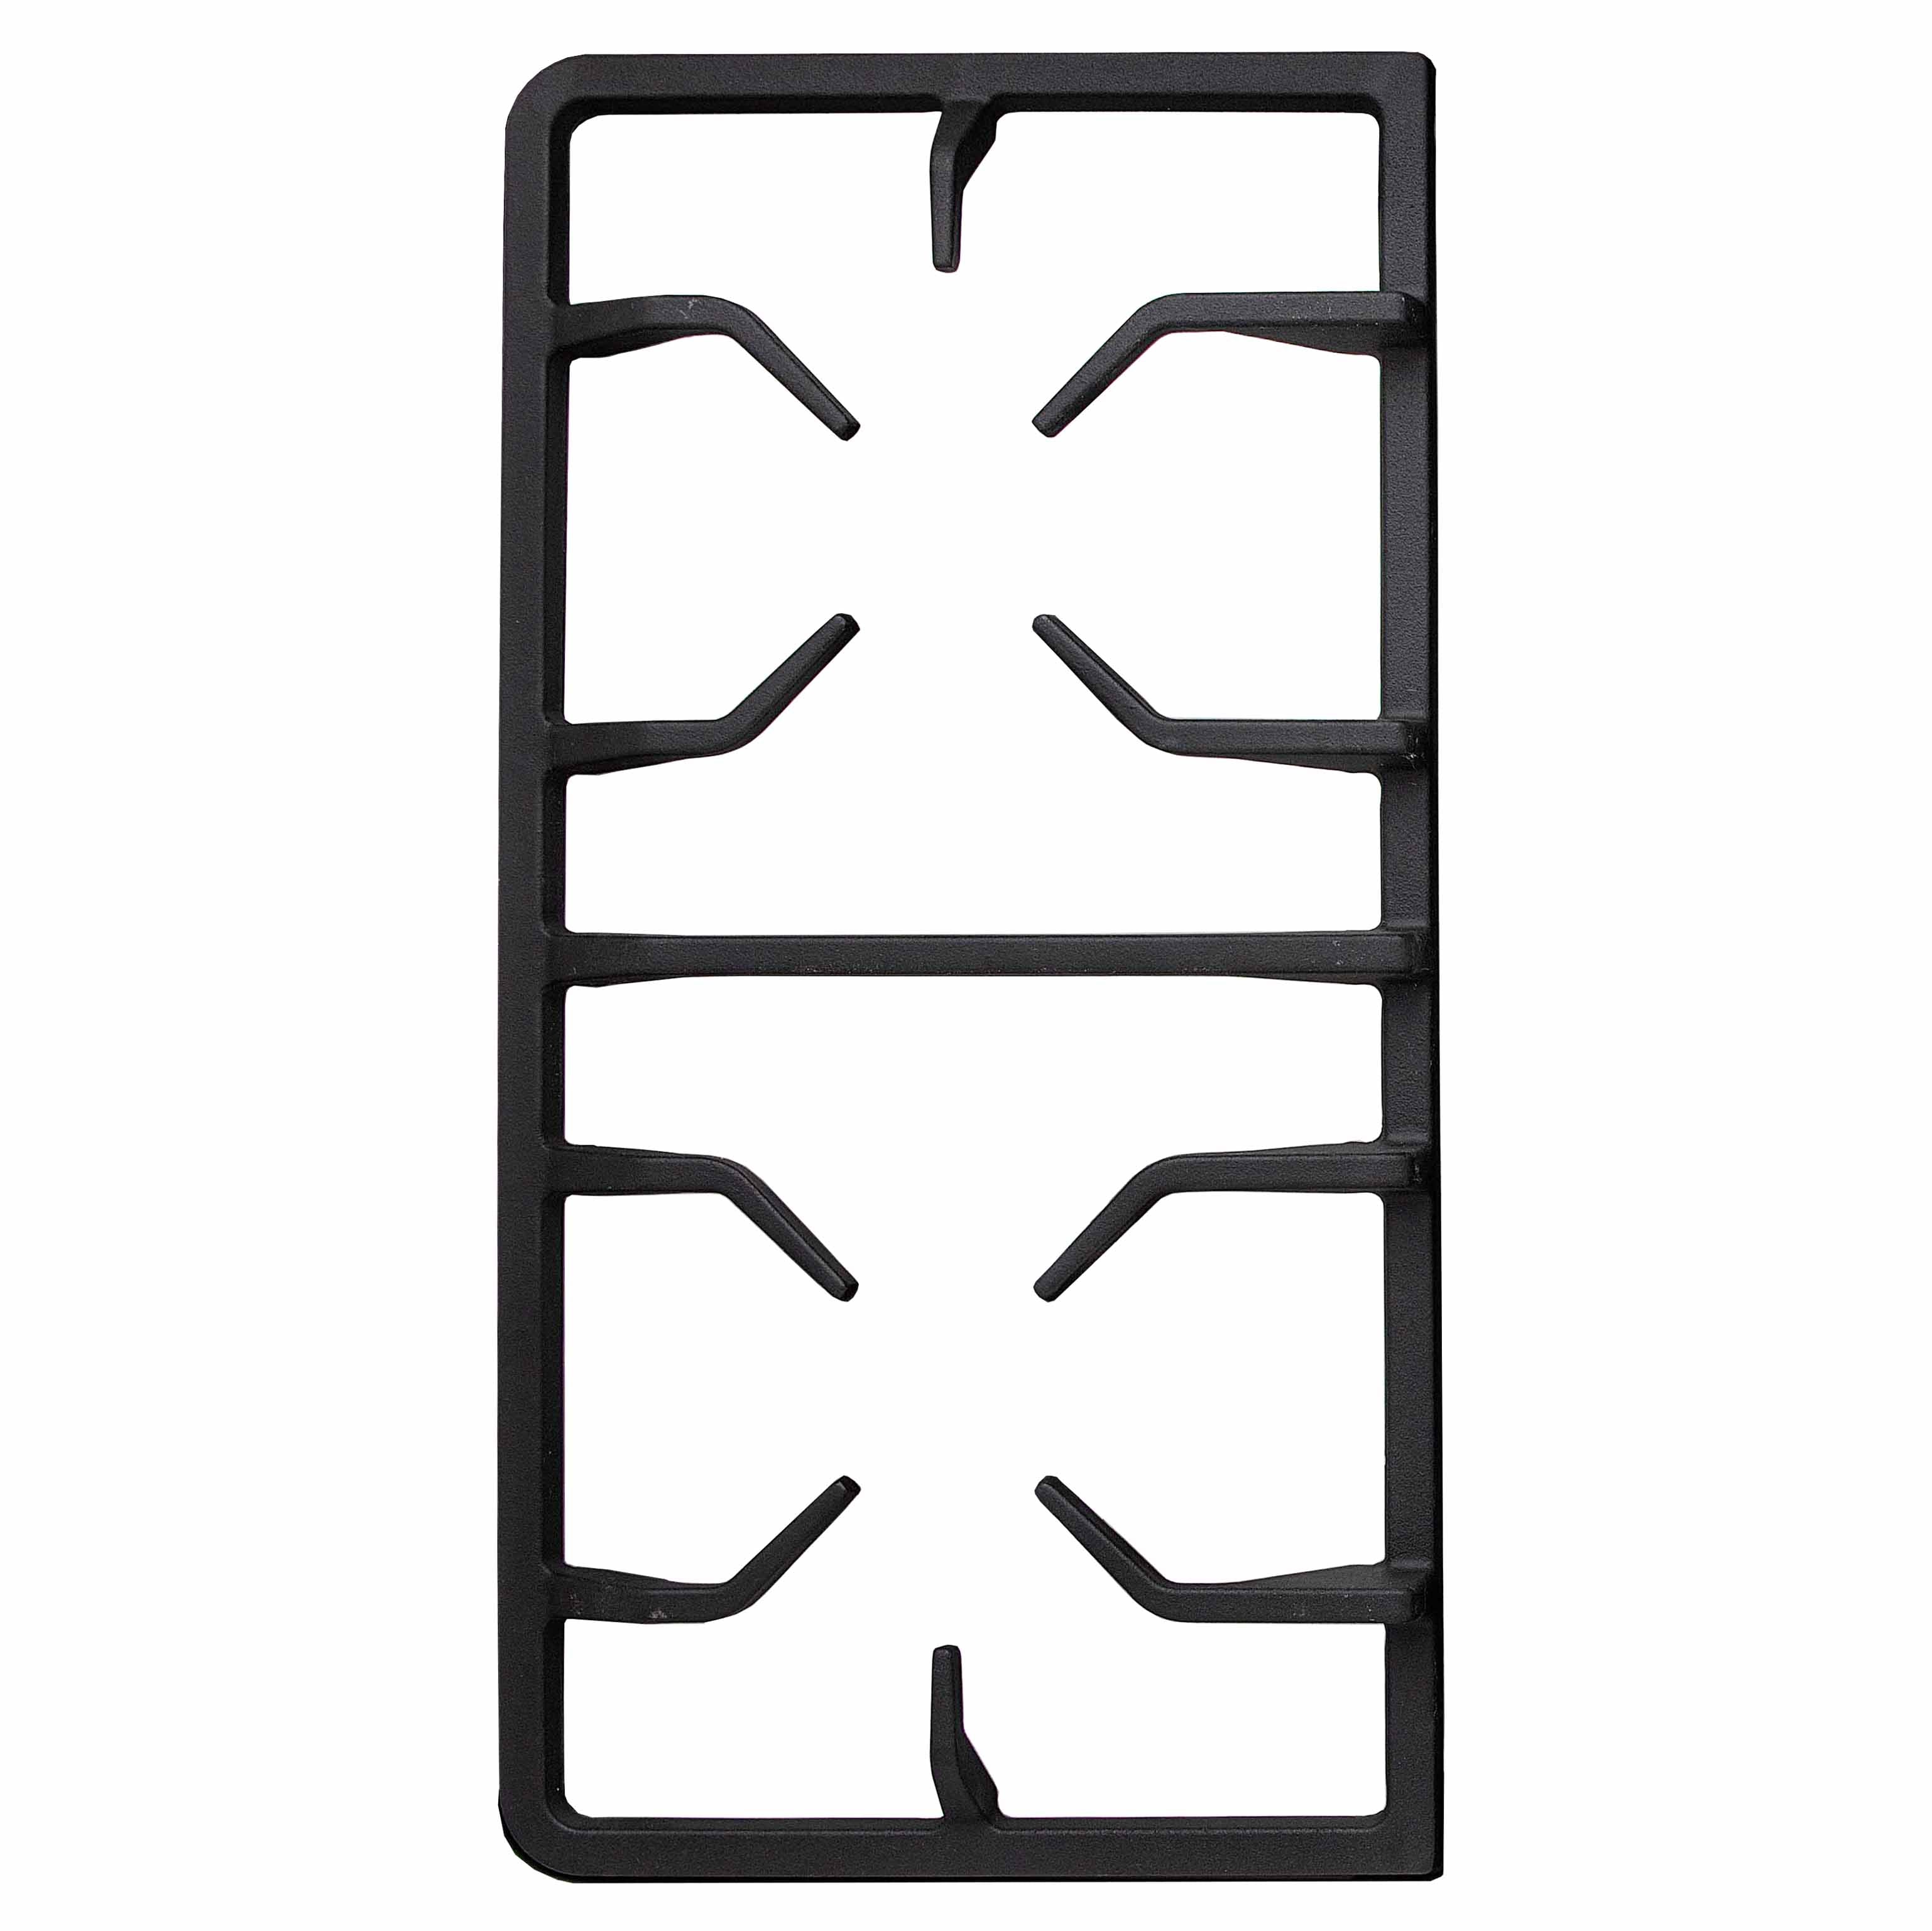 Right or left cast iron grate for gas range